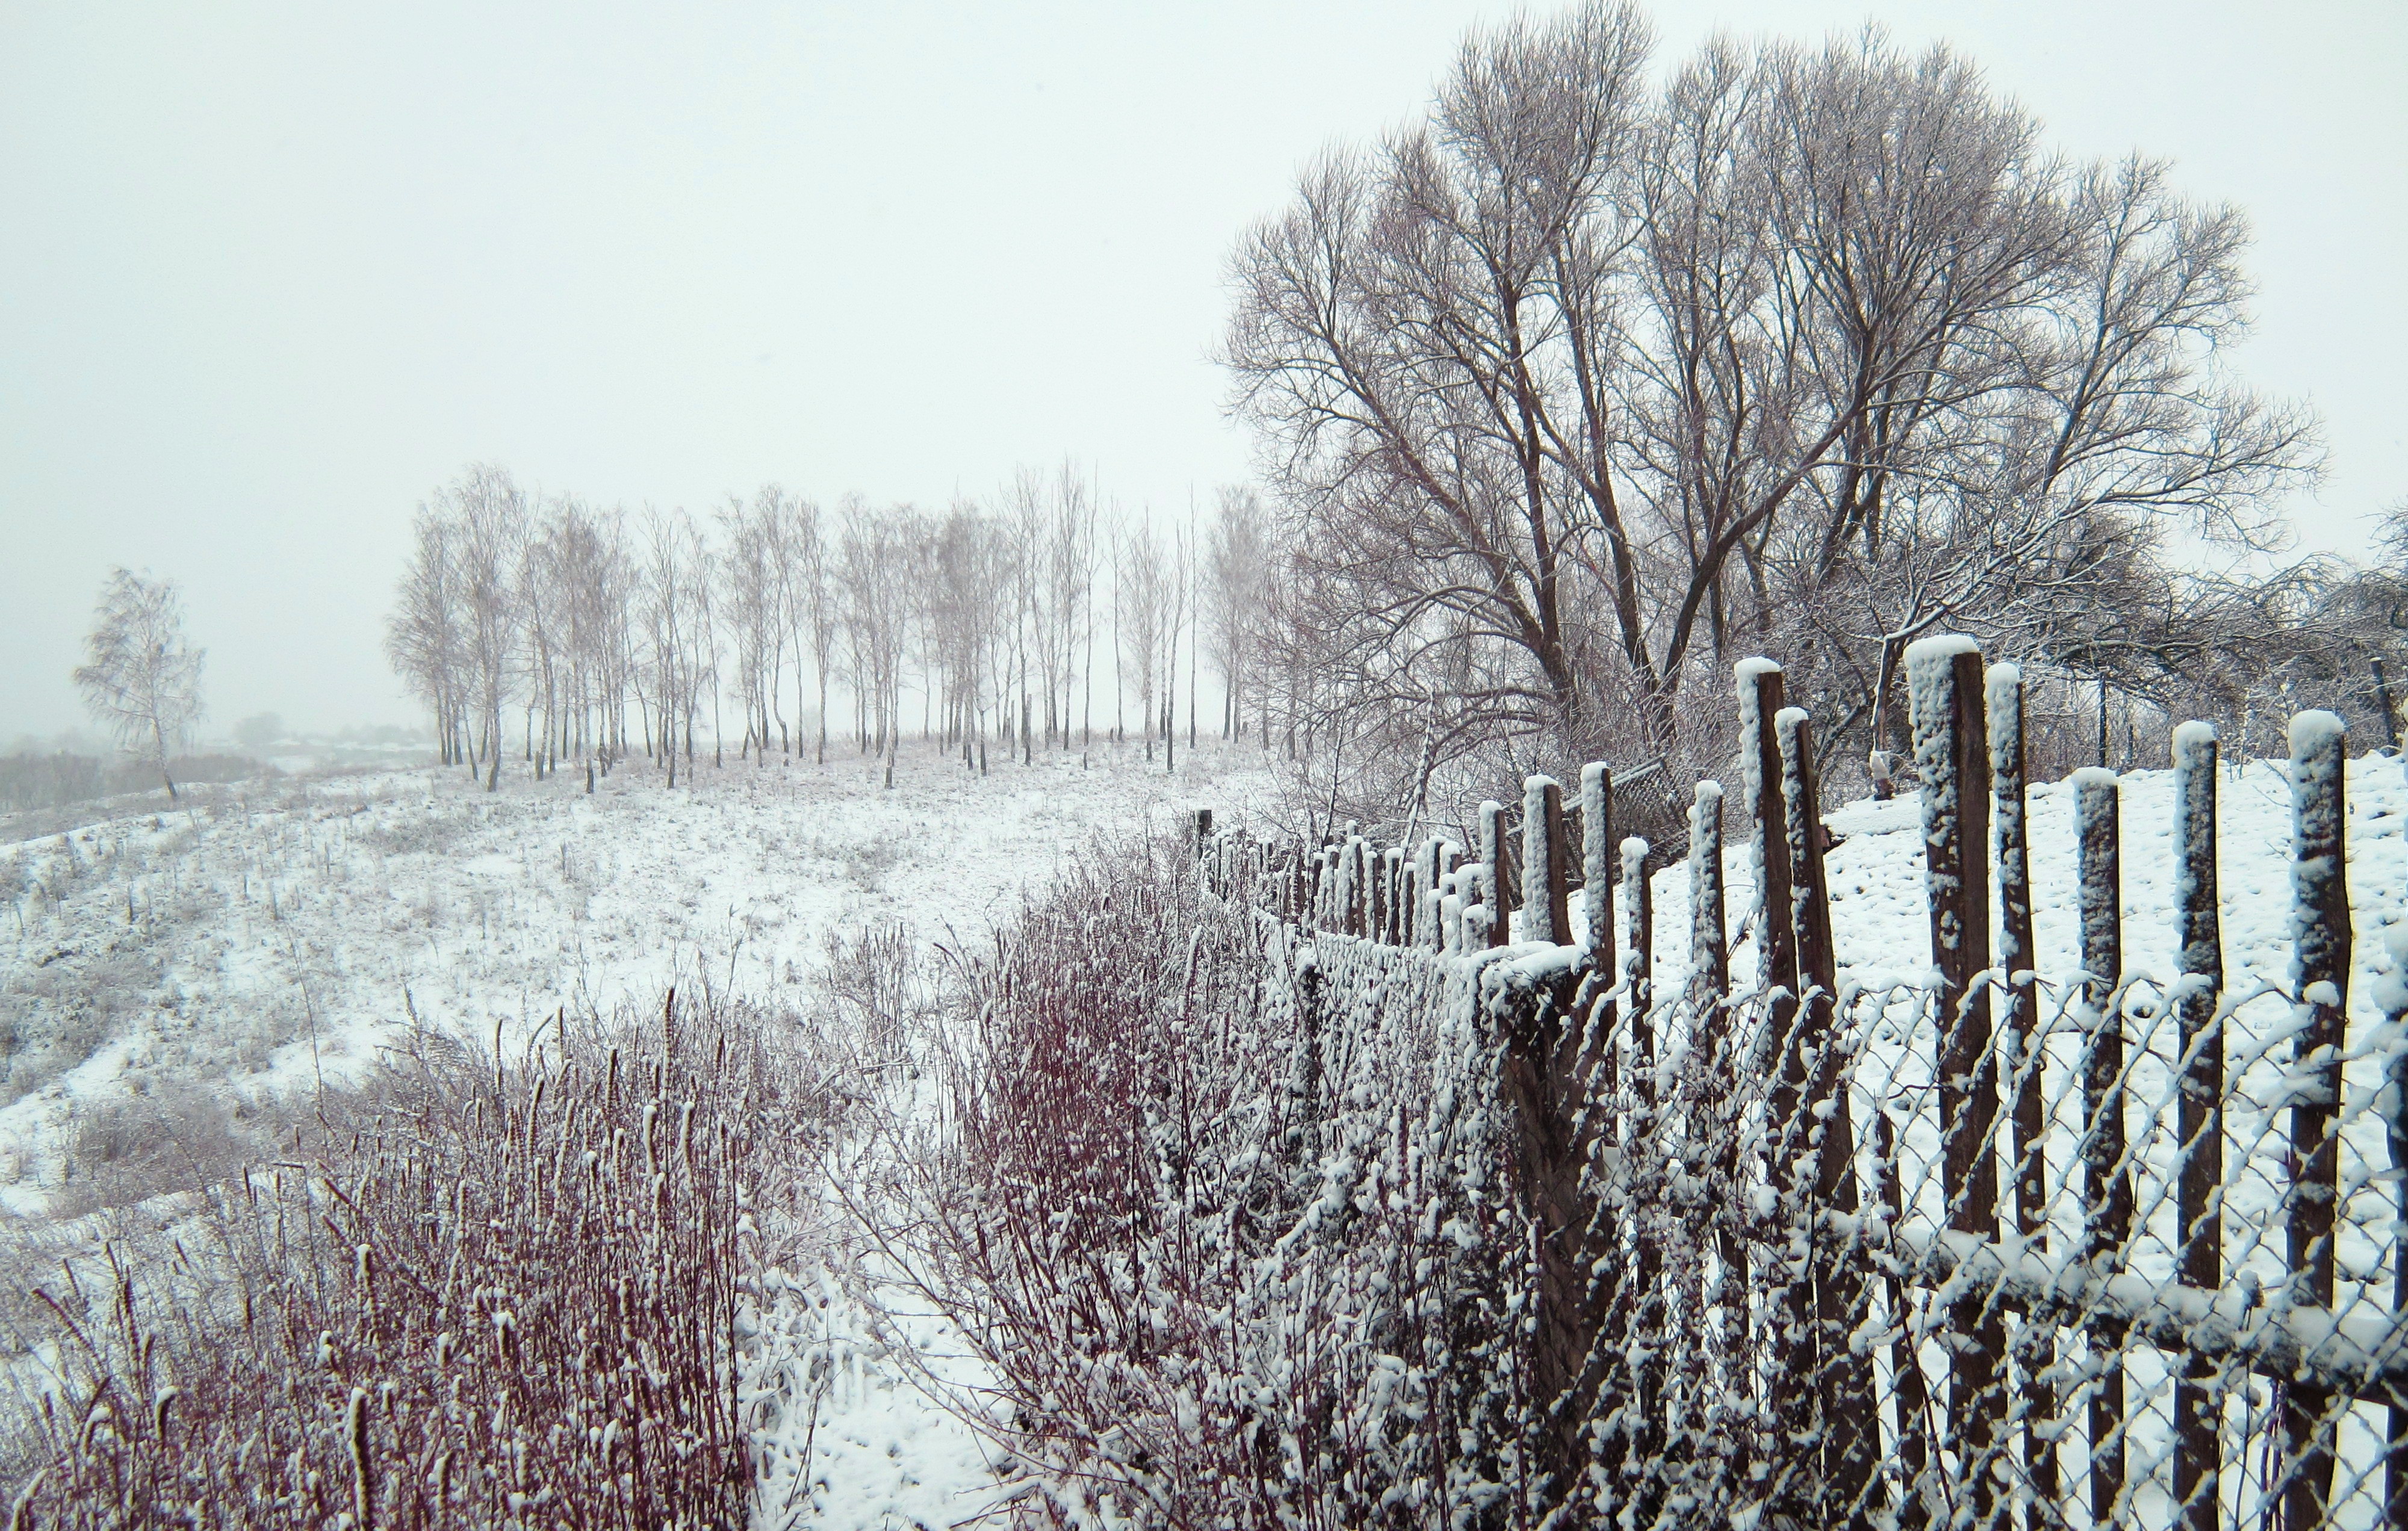 General 4000x2544 Russia winter snow trees fence gloomy overcast